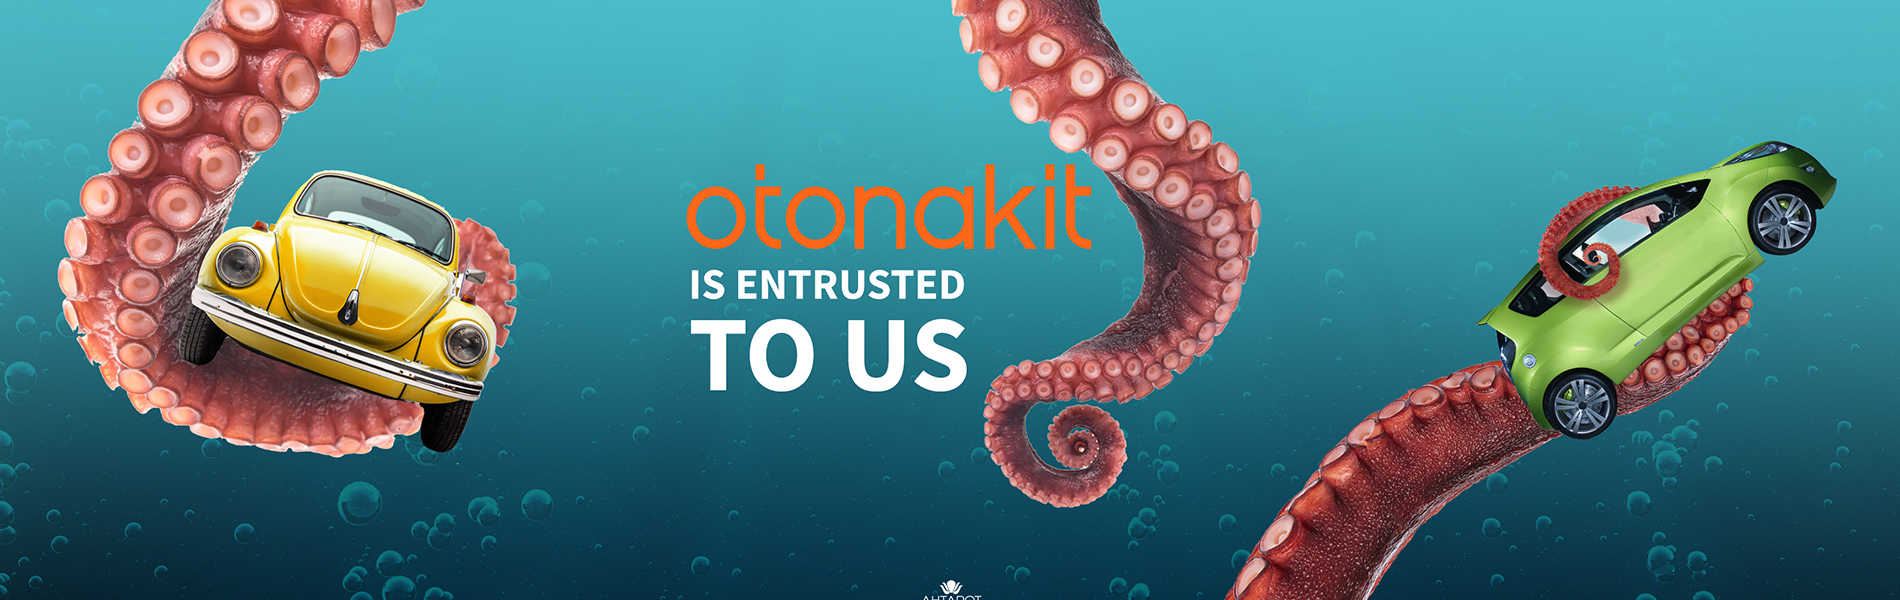 Otonakit is Entrusted to Us